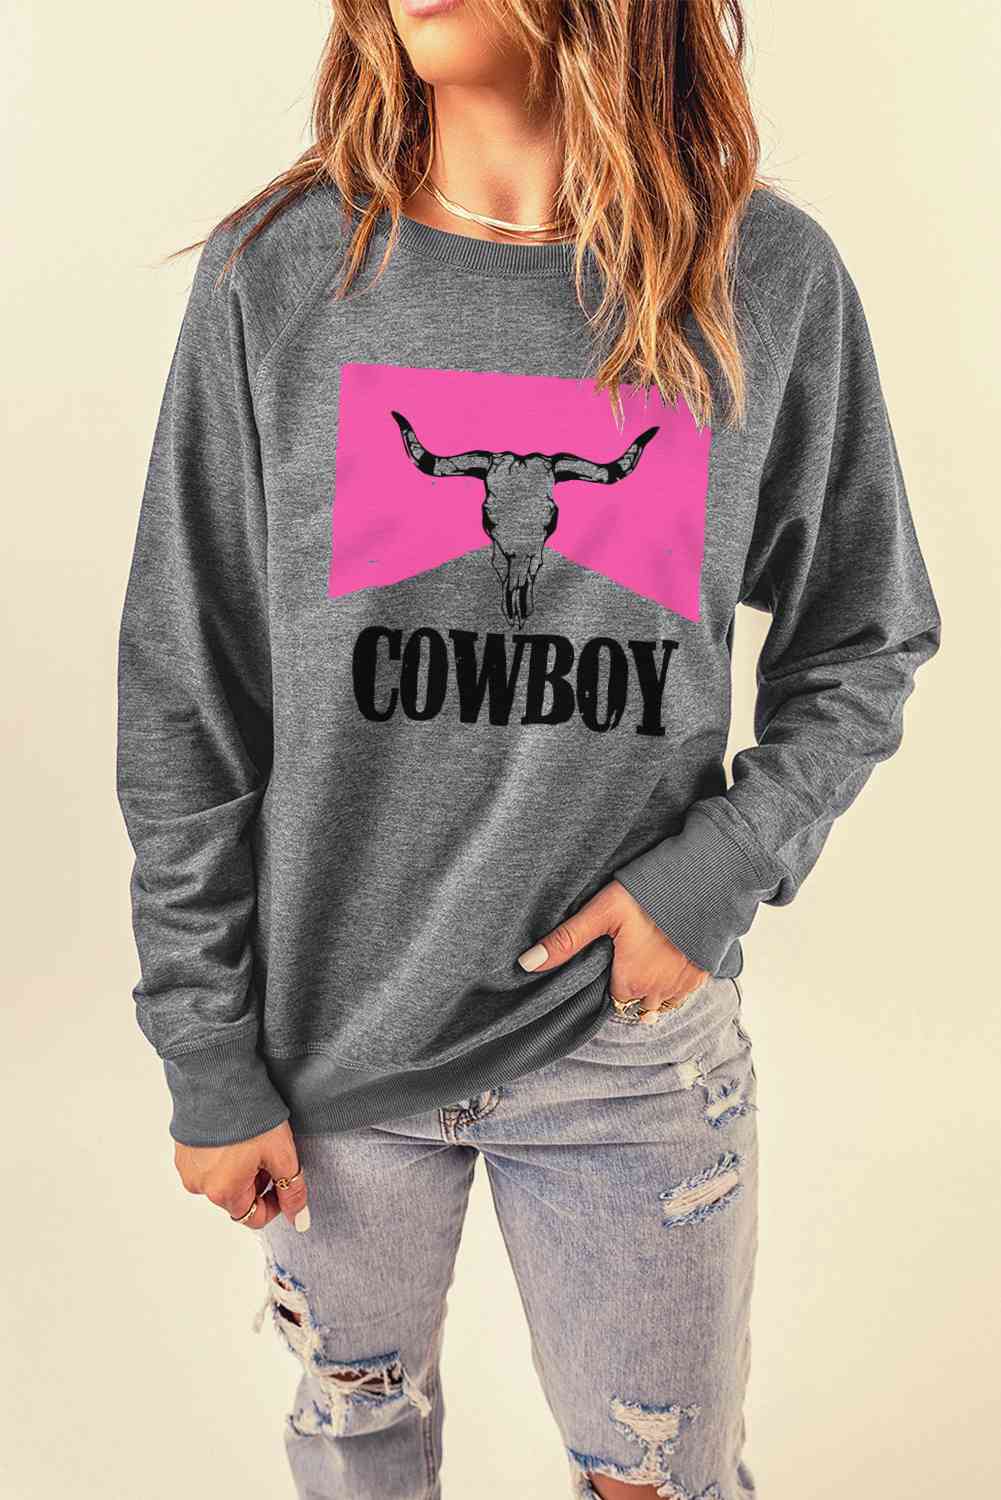 Compliments To The Cowboy Sweatshirt